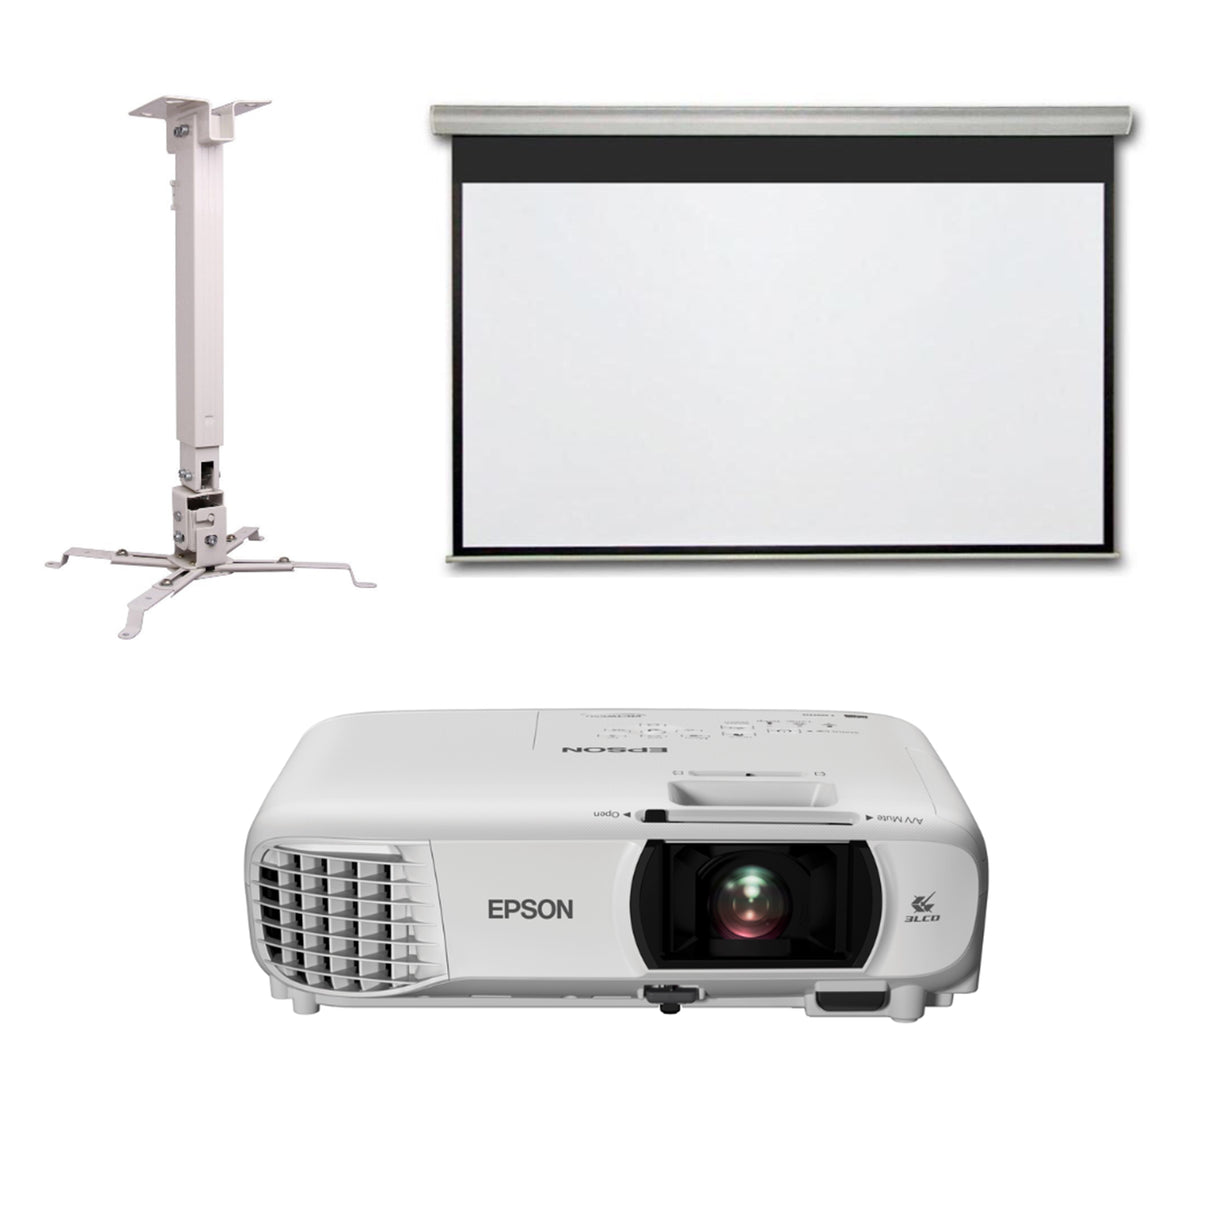 Epson EHTW-750 Projector + RNT Projection Screen Motorised 100 Inches - 16:9 Ratio + Projector Mount (Bundle Pack)